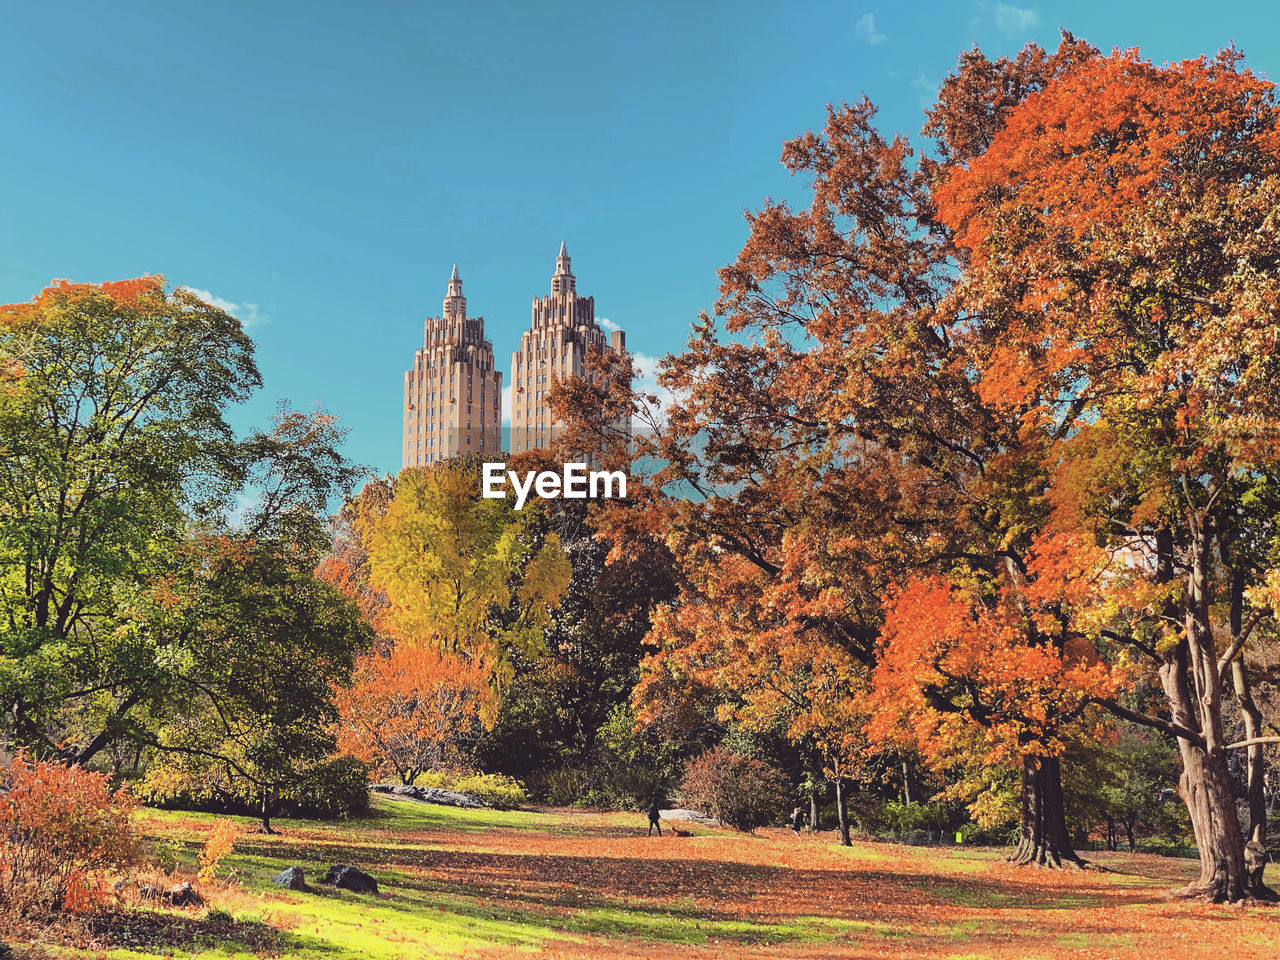 Trees and buildings against sky during autumn at central park new york city